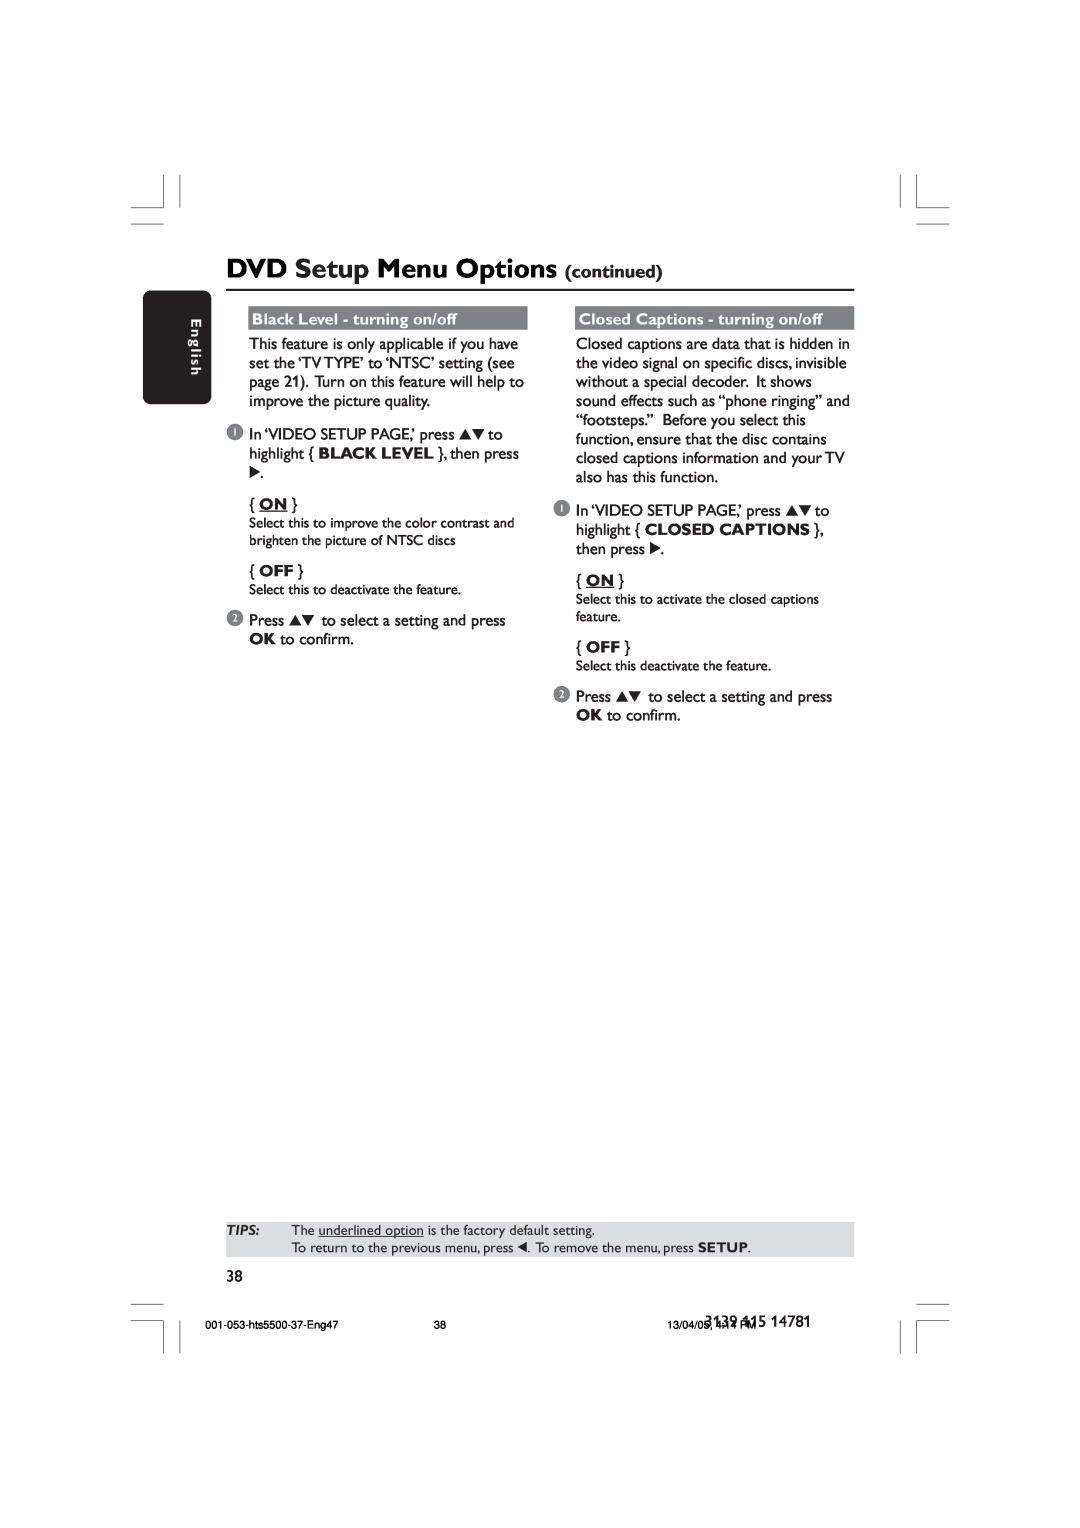 Philips HTS5500C DVD Setup Menu Options continued, Black Level - turning on/off, Closed Captions - turning on/off 